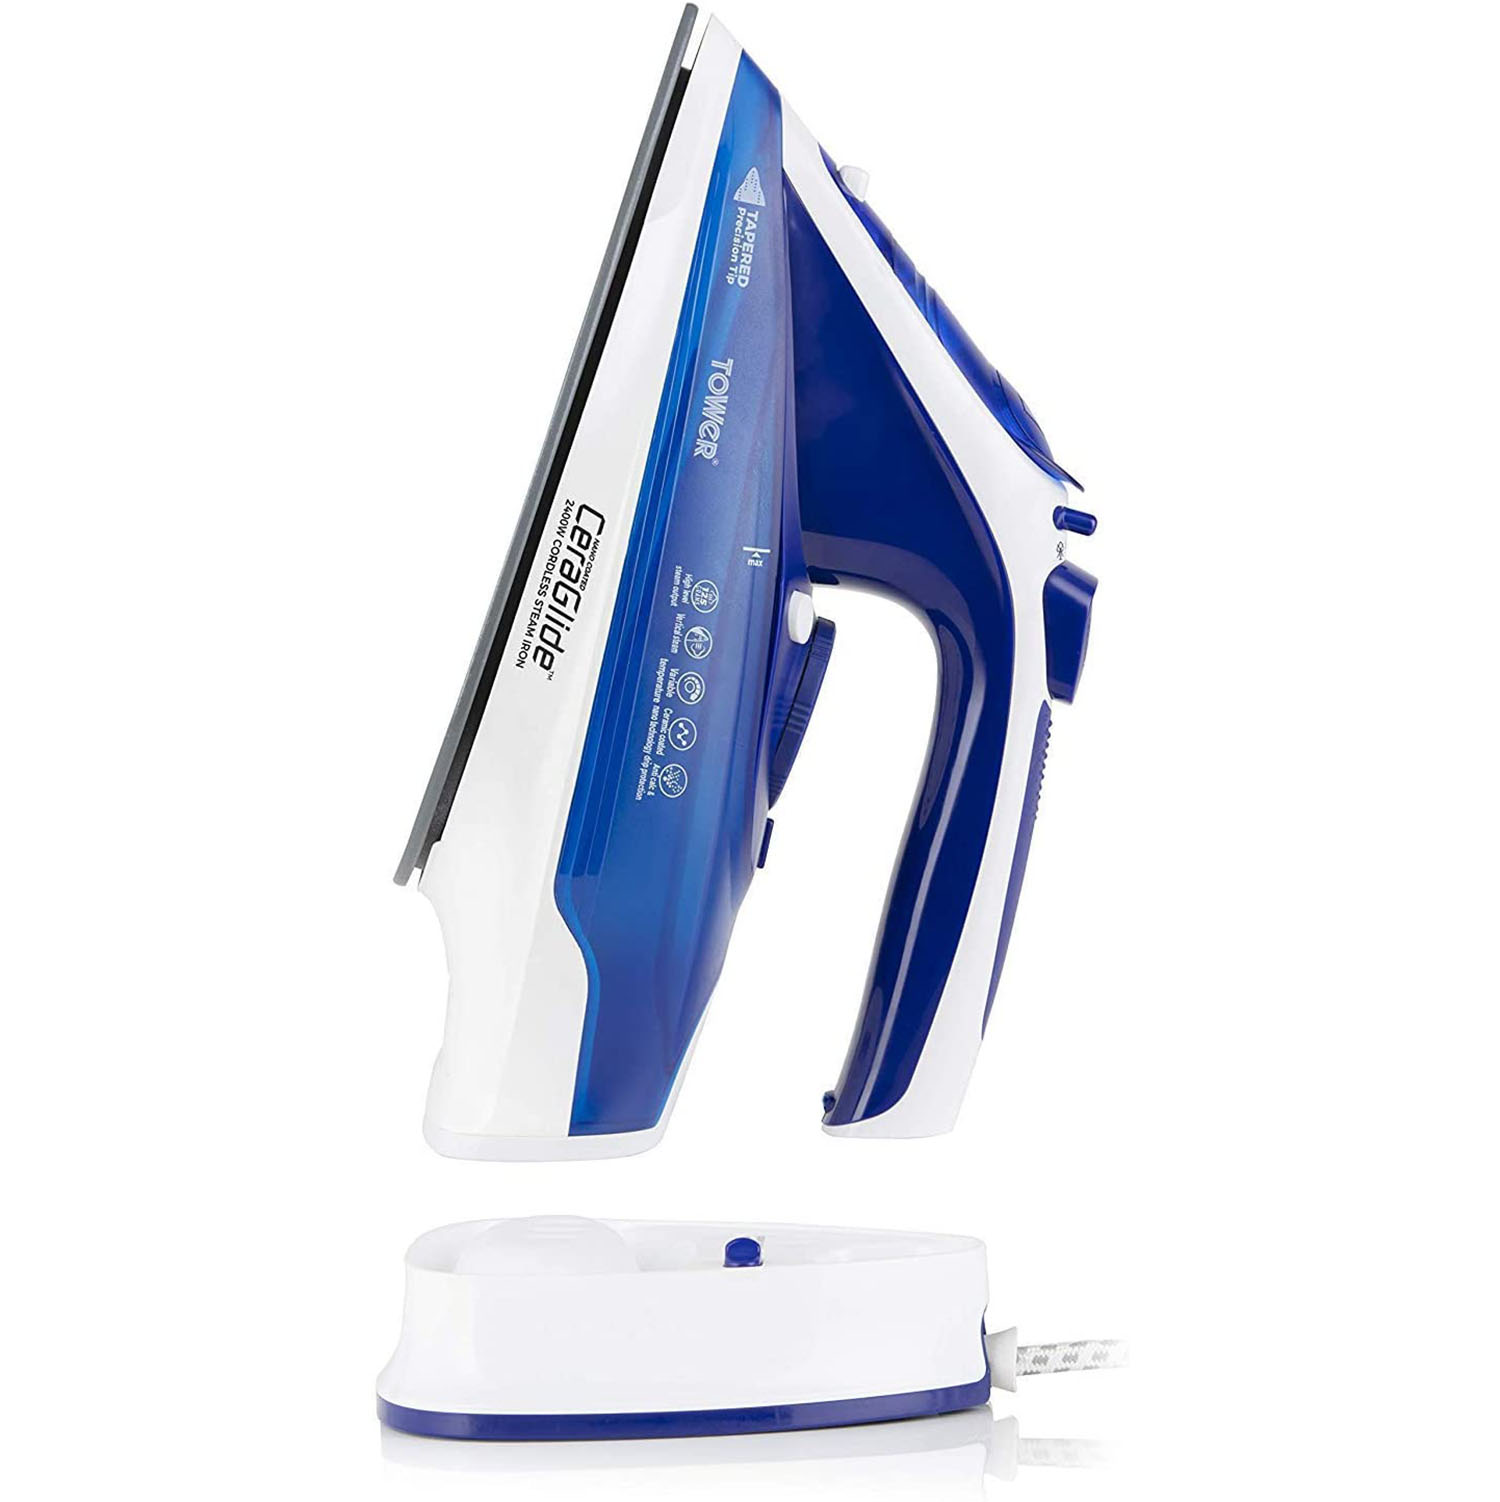 Tower 2-in-1 Cord or Cordless Iron